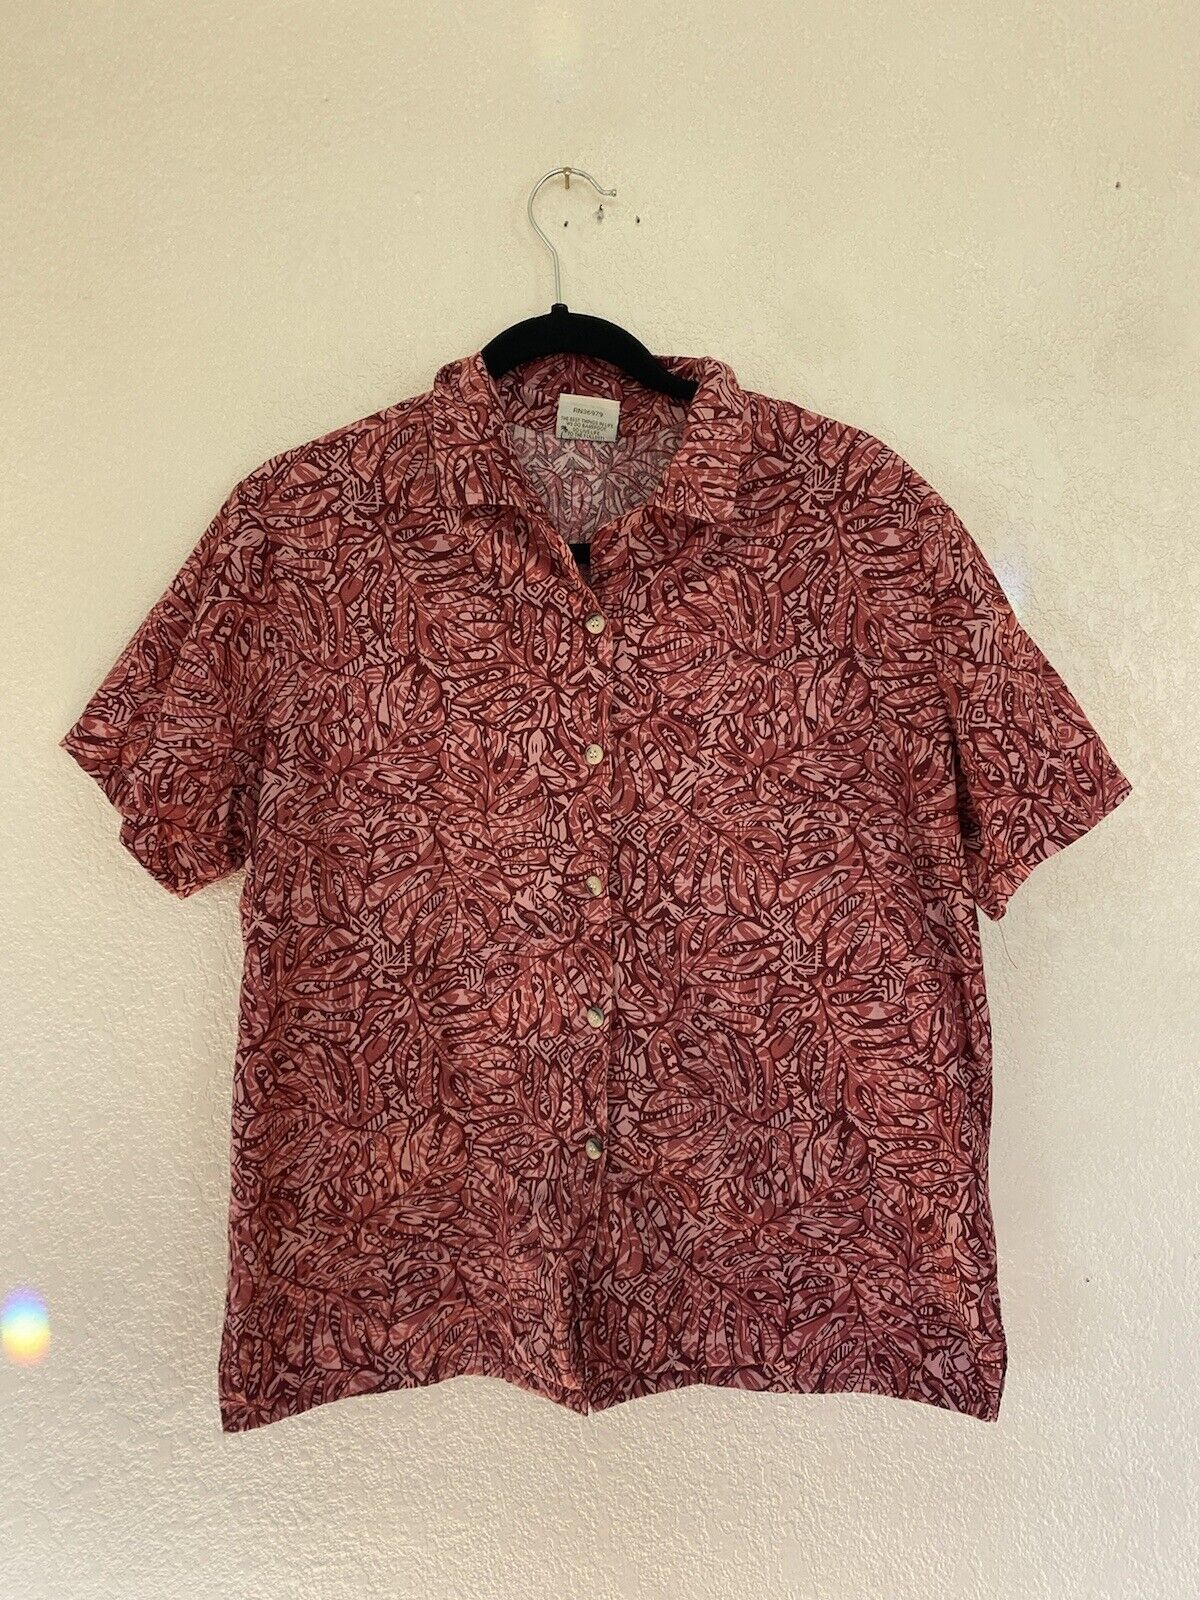 Red Tropical Print Button Up Shirt - Go Barefoot - Women s Large # 2215